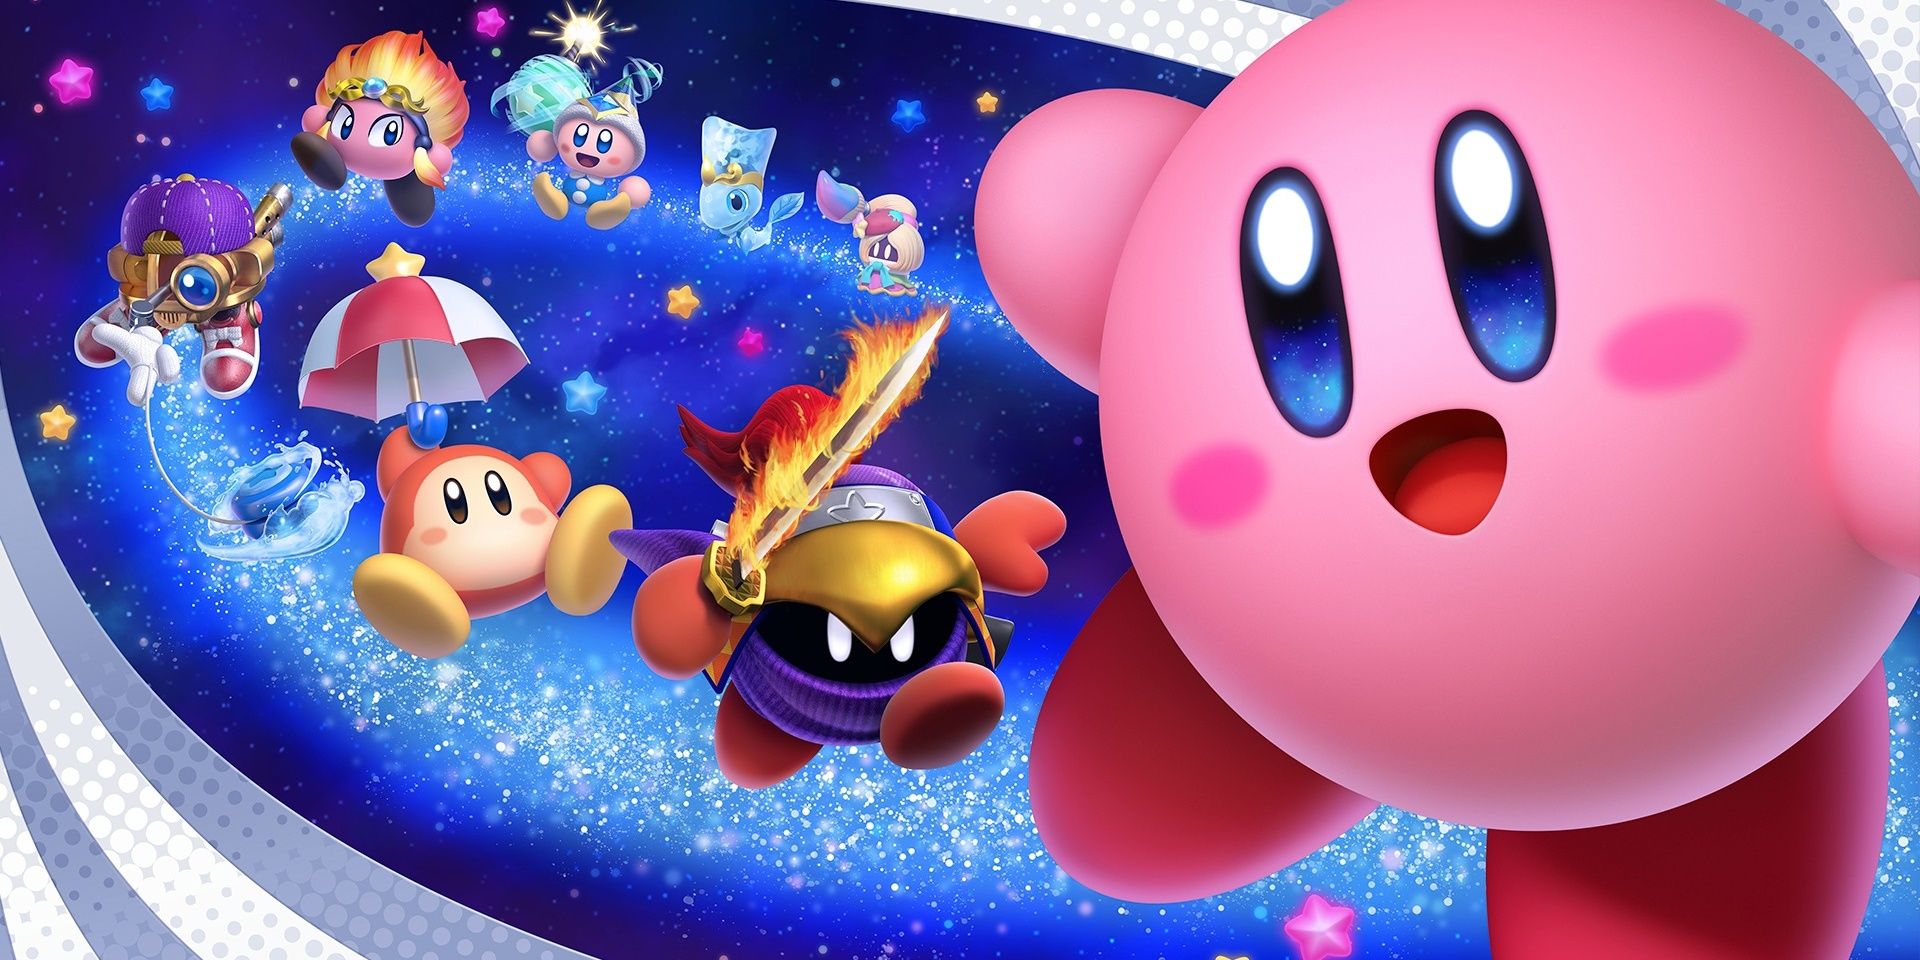 Kirby smiling at the camera as his many star friends fly in behind him